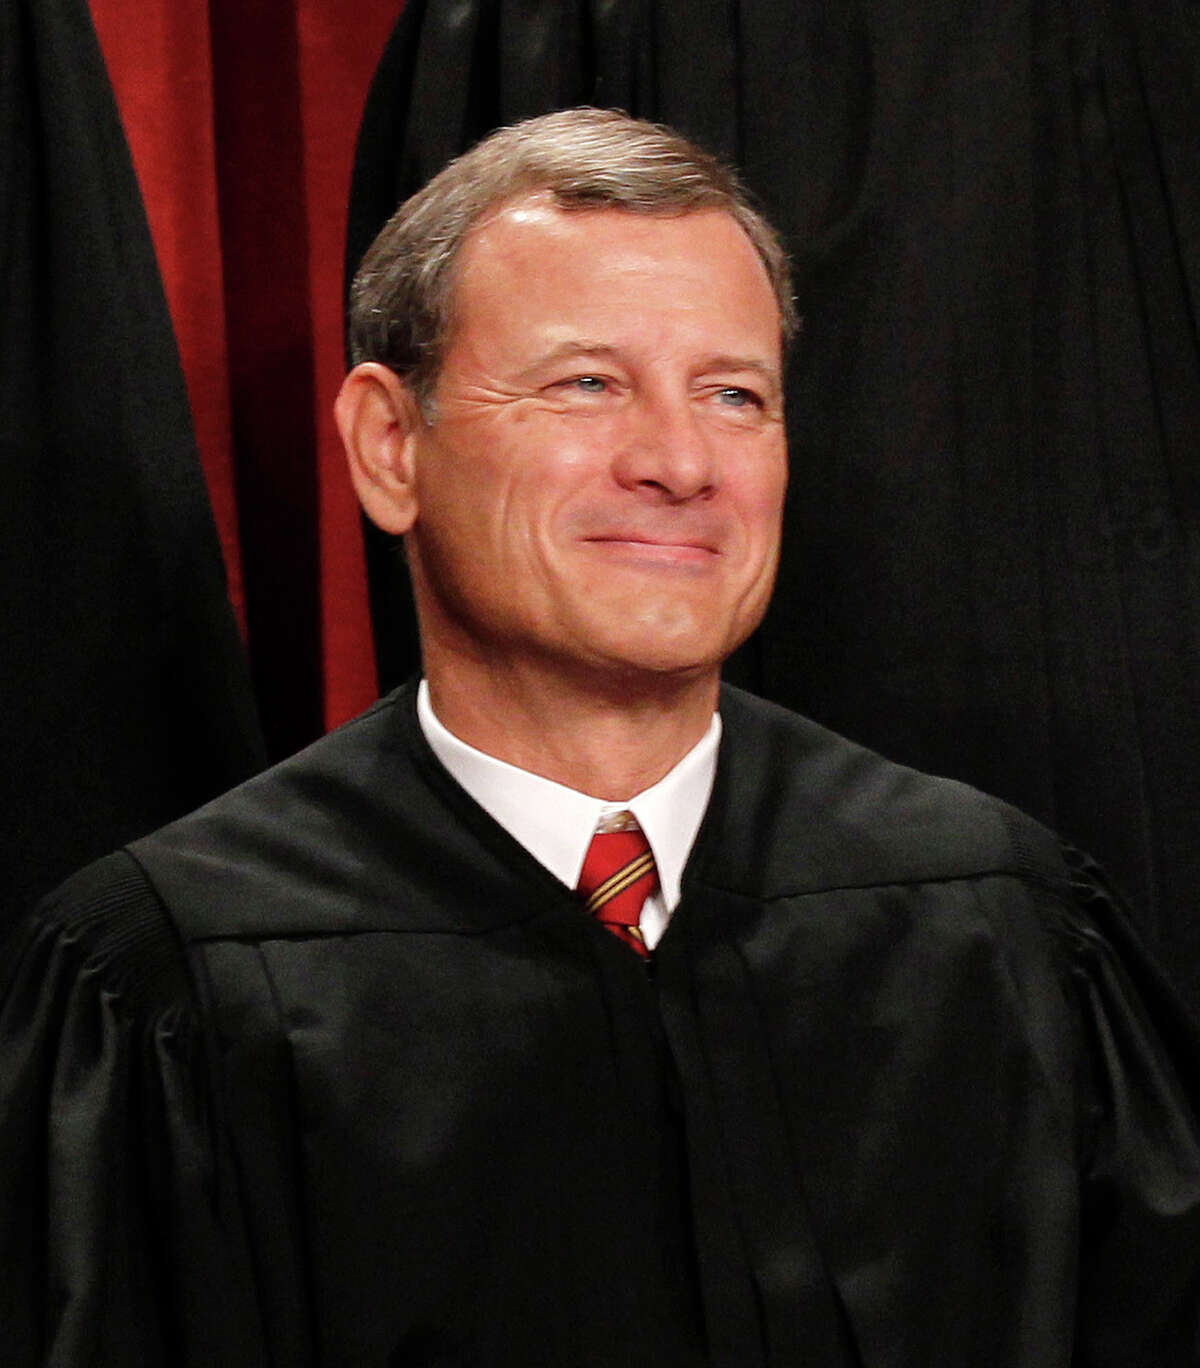 Chief Justice John G. Roberts is seen during the 2010 group portrait at the Supreme Court Building in Washington, D.C.